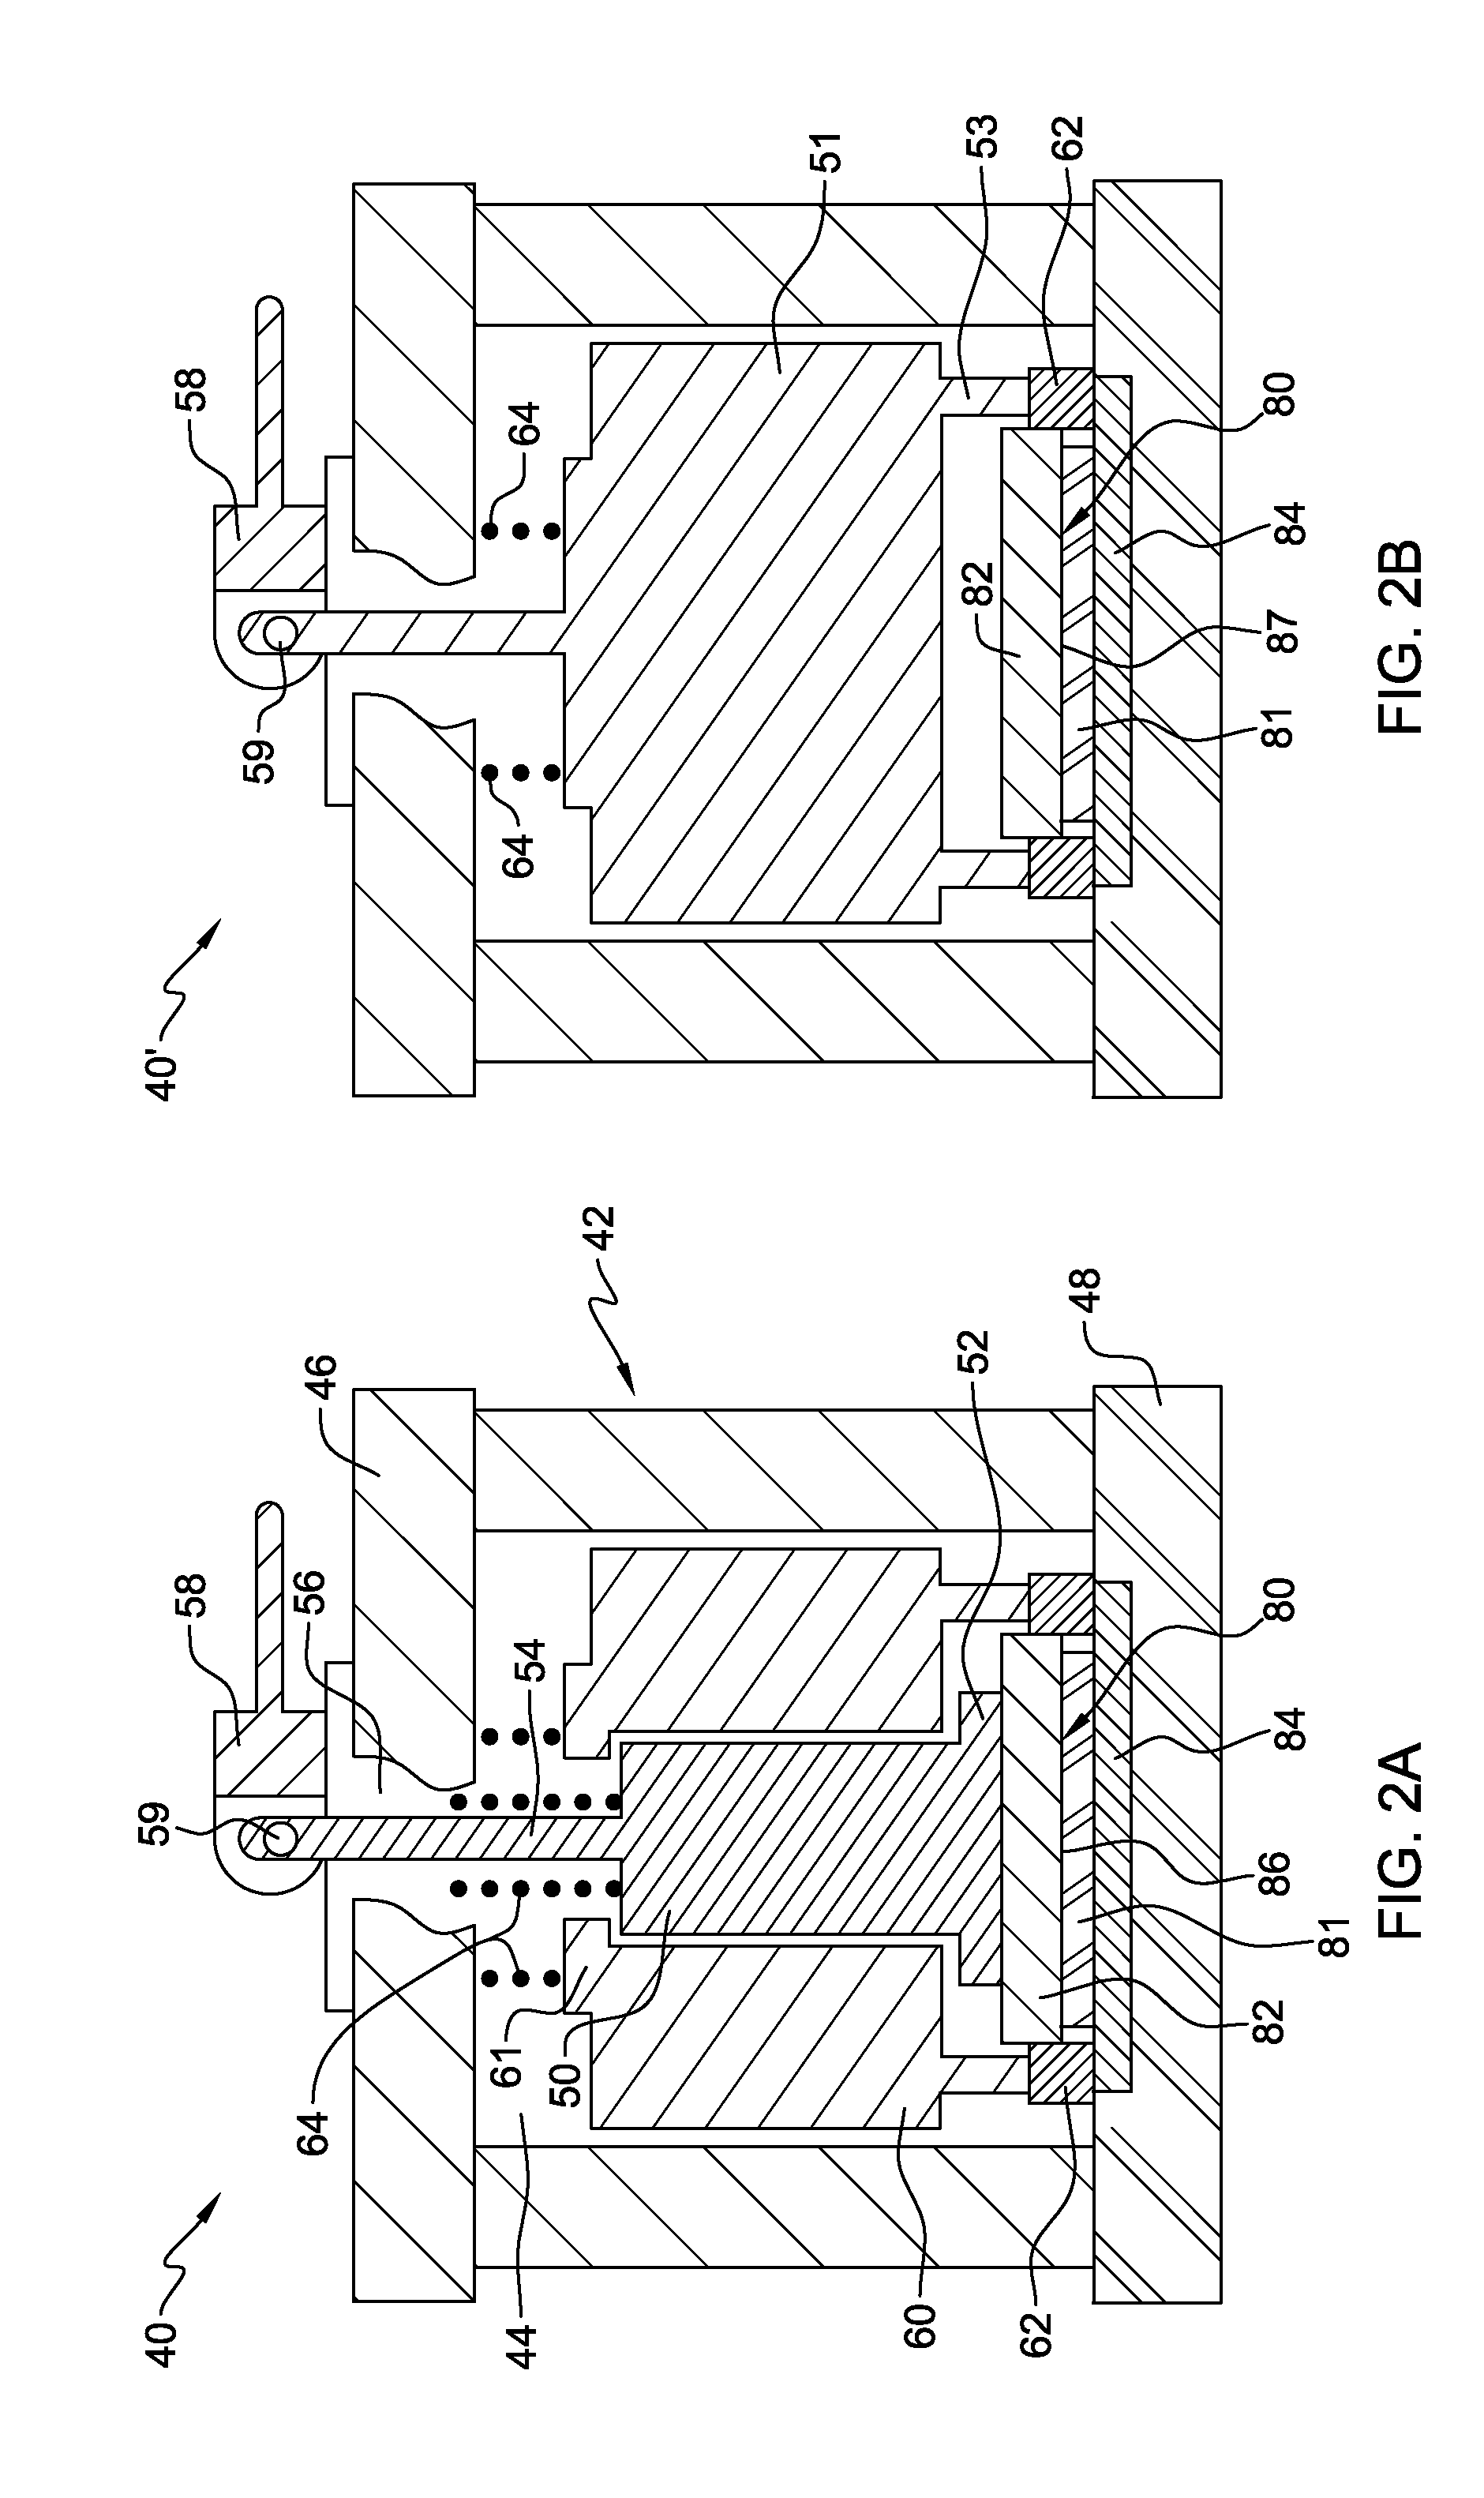 Multi-component electronic module with integral coolant-cooling